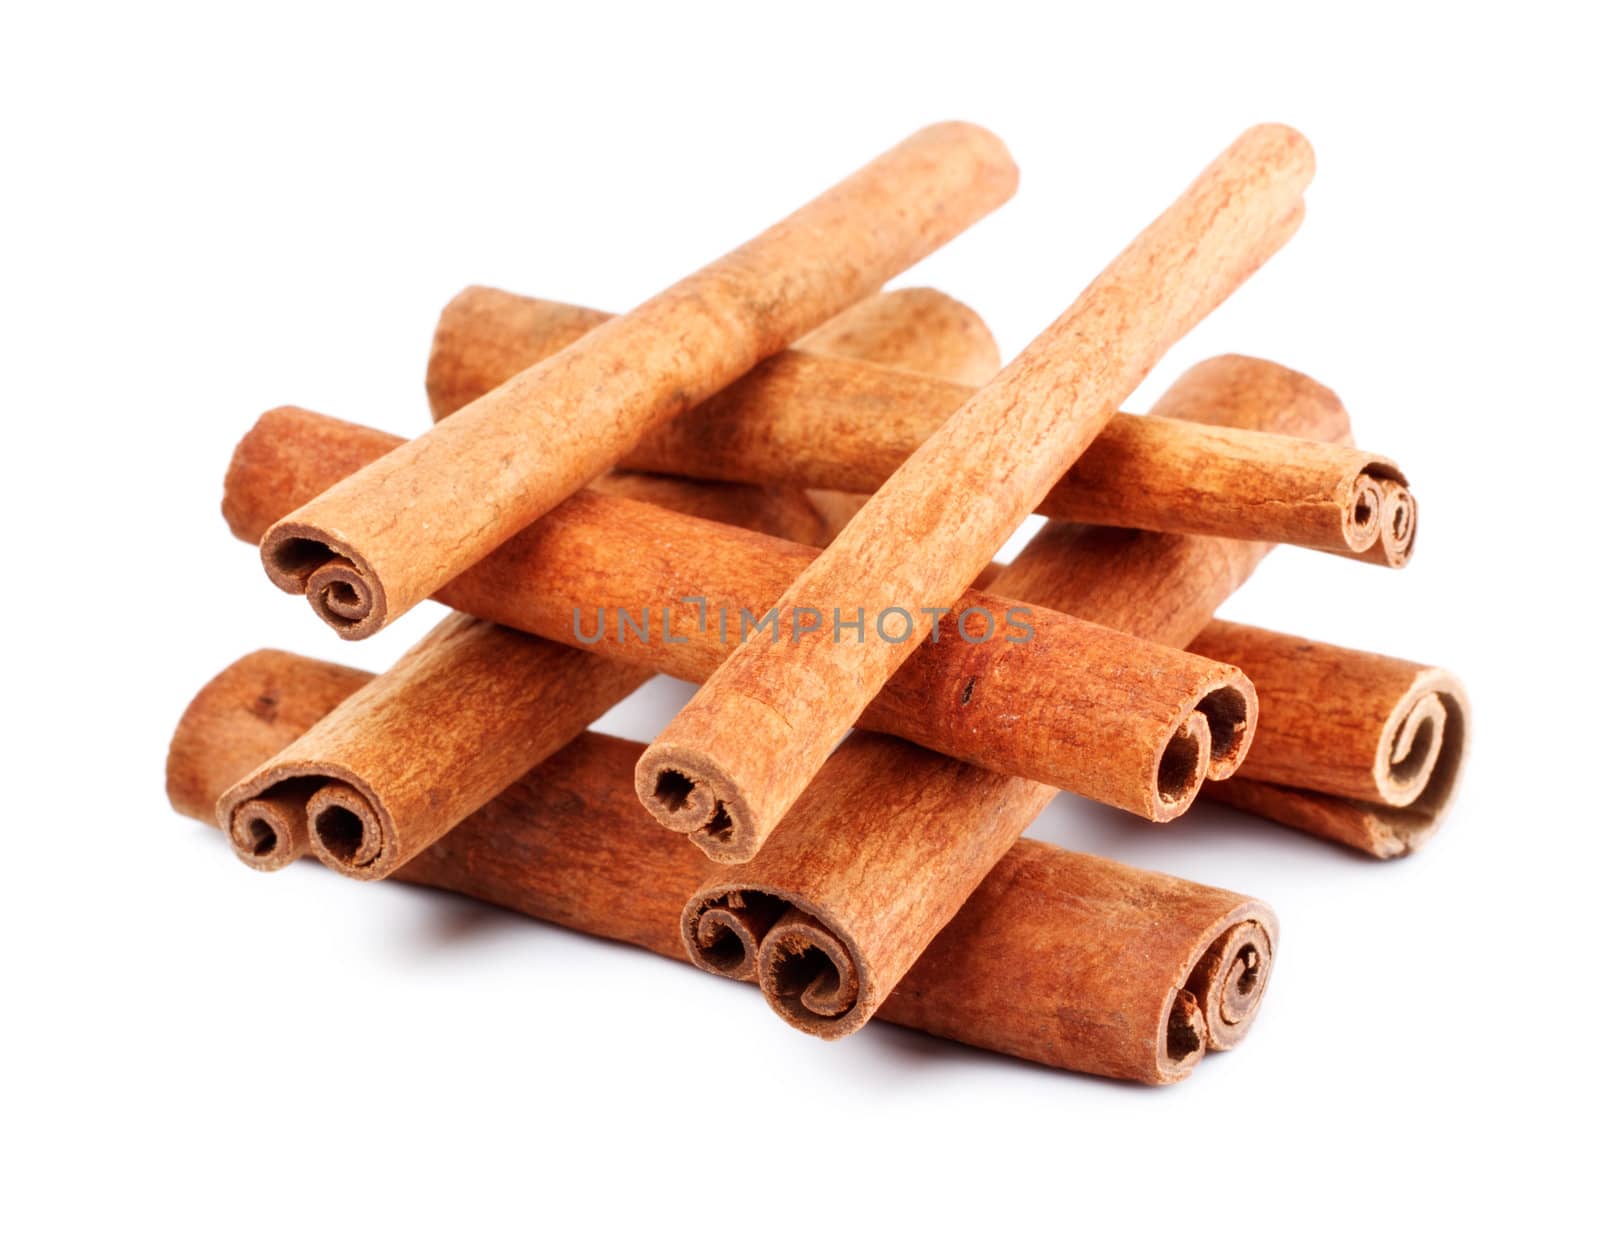 some cinnamon sticks isolated on white background